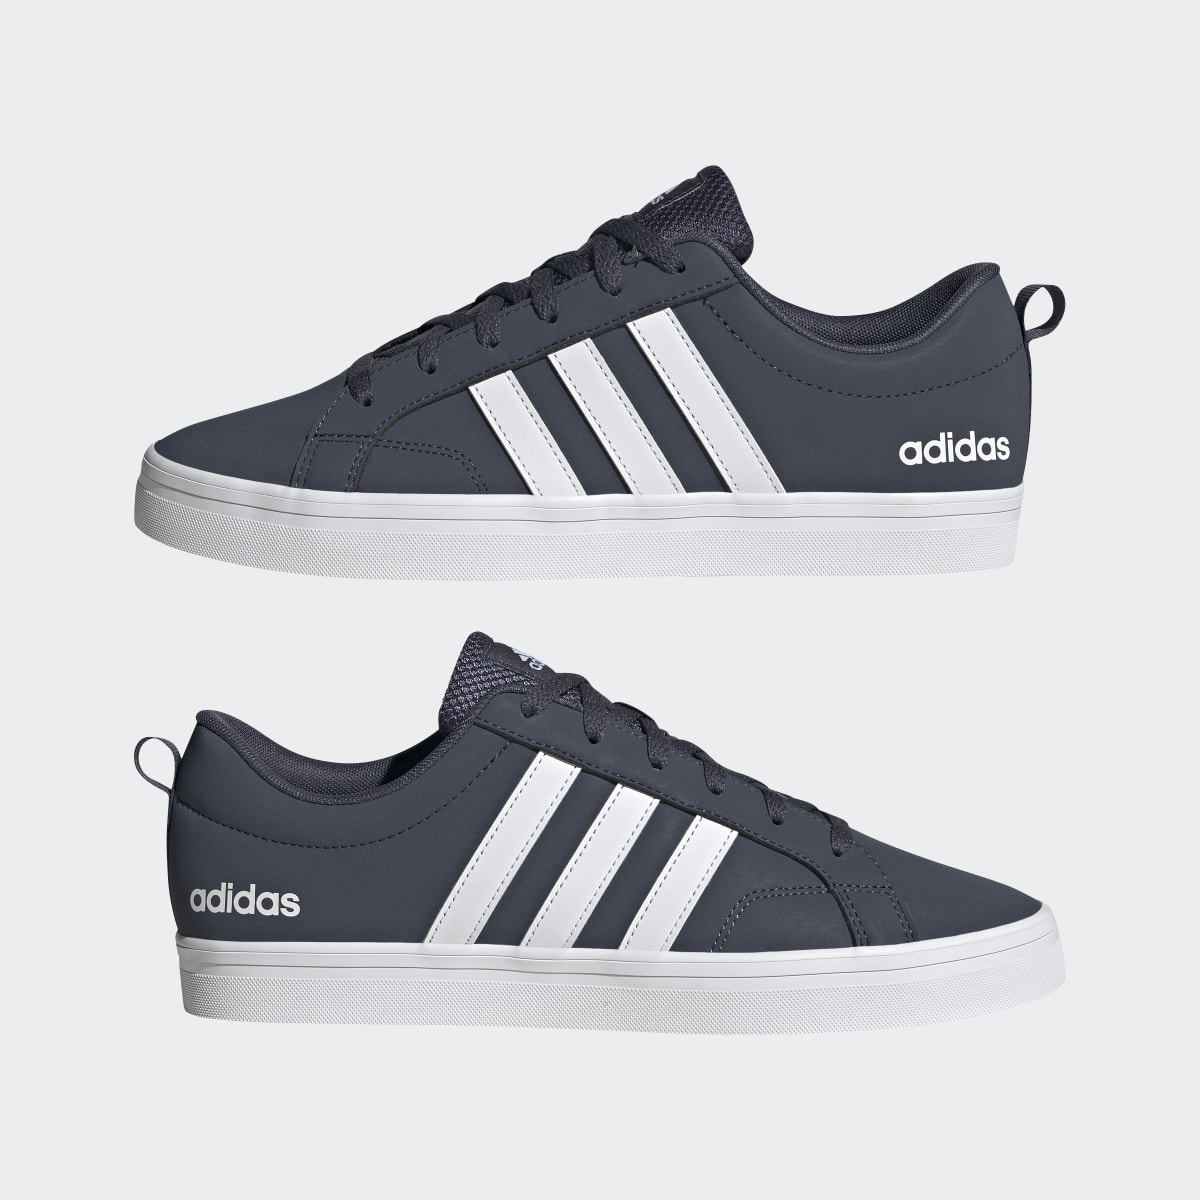 Adidas VS Pace 2.0 Lifestyle Skateboarding Shoes. 8